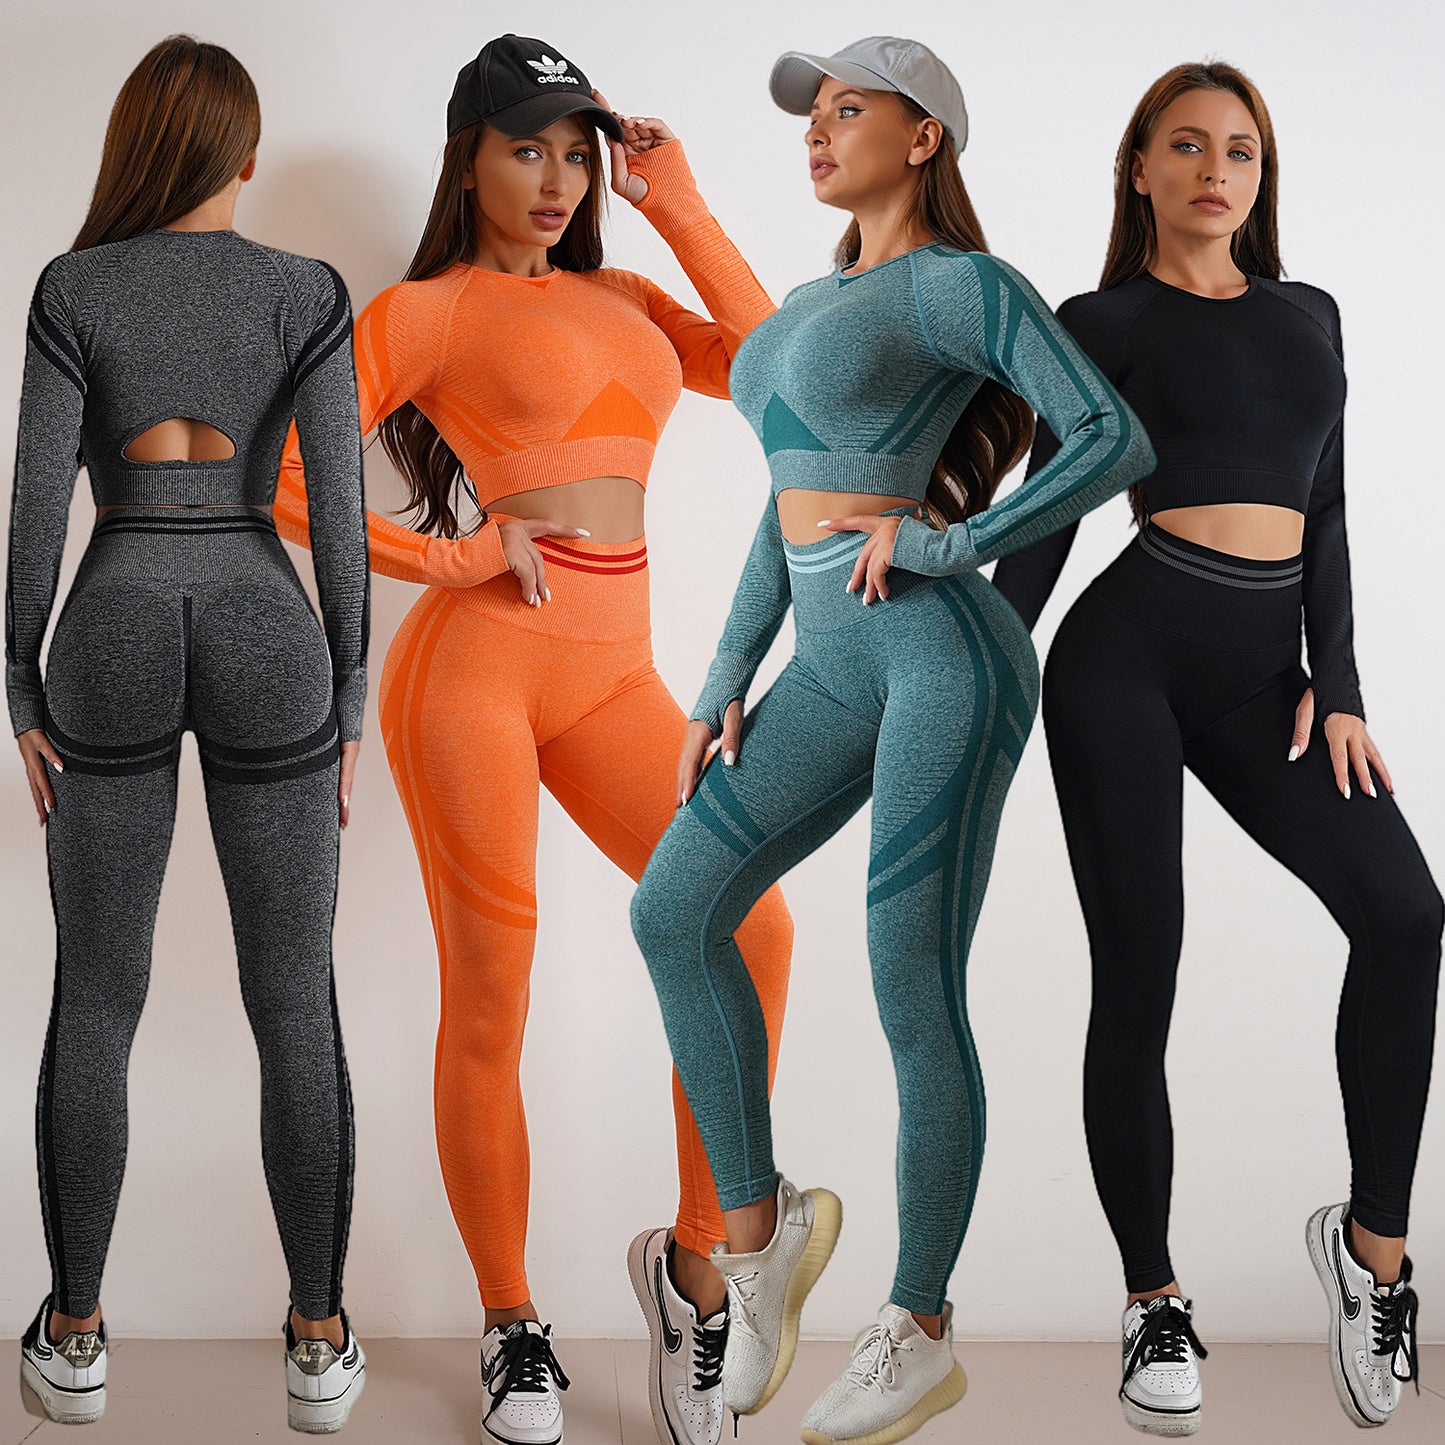 WILKYsTanktop Suit leggings2pcs Seamless Yoga Pants Sports Gym Fitness Leggings And Long Sleeve TThe Seamless Yoga Pants are designed to provide maximum comfort and flexibility during your yoga practice. The pants are made of high-quality, moisture-wicking fabri